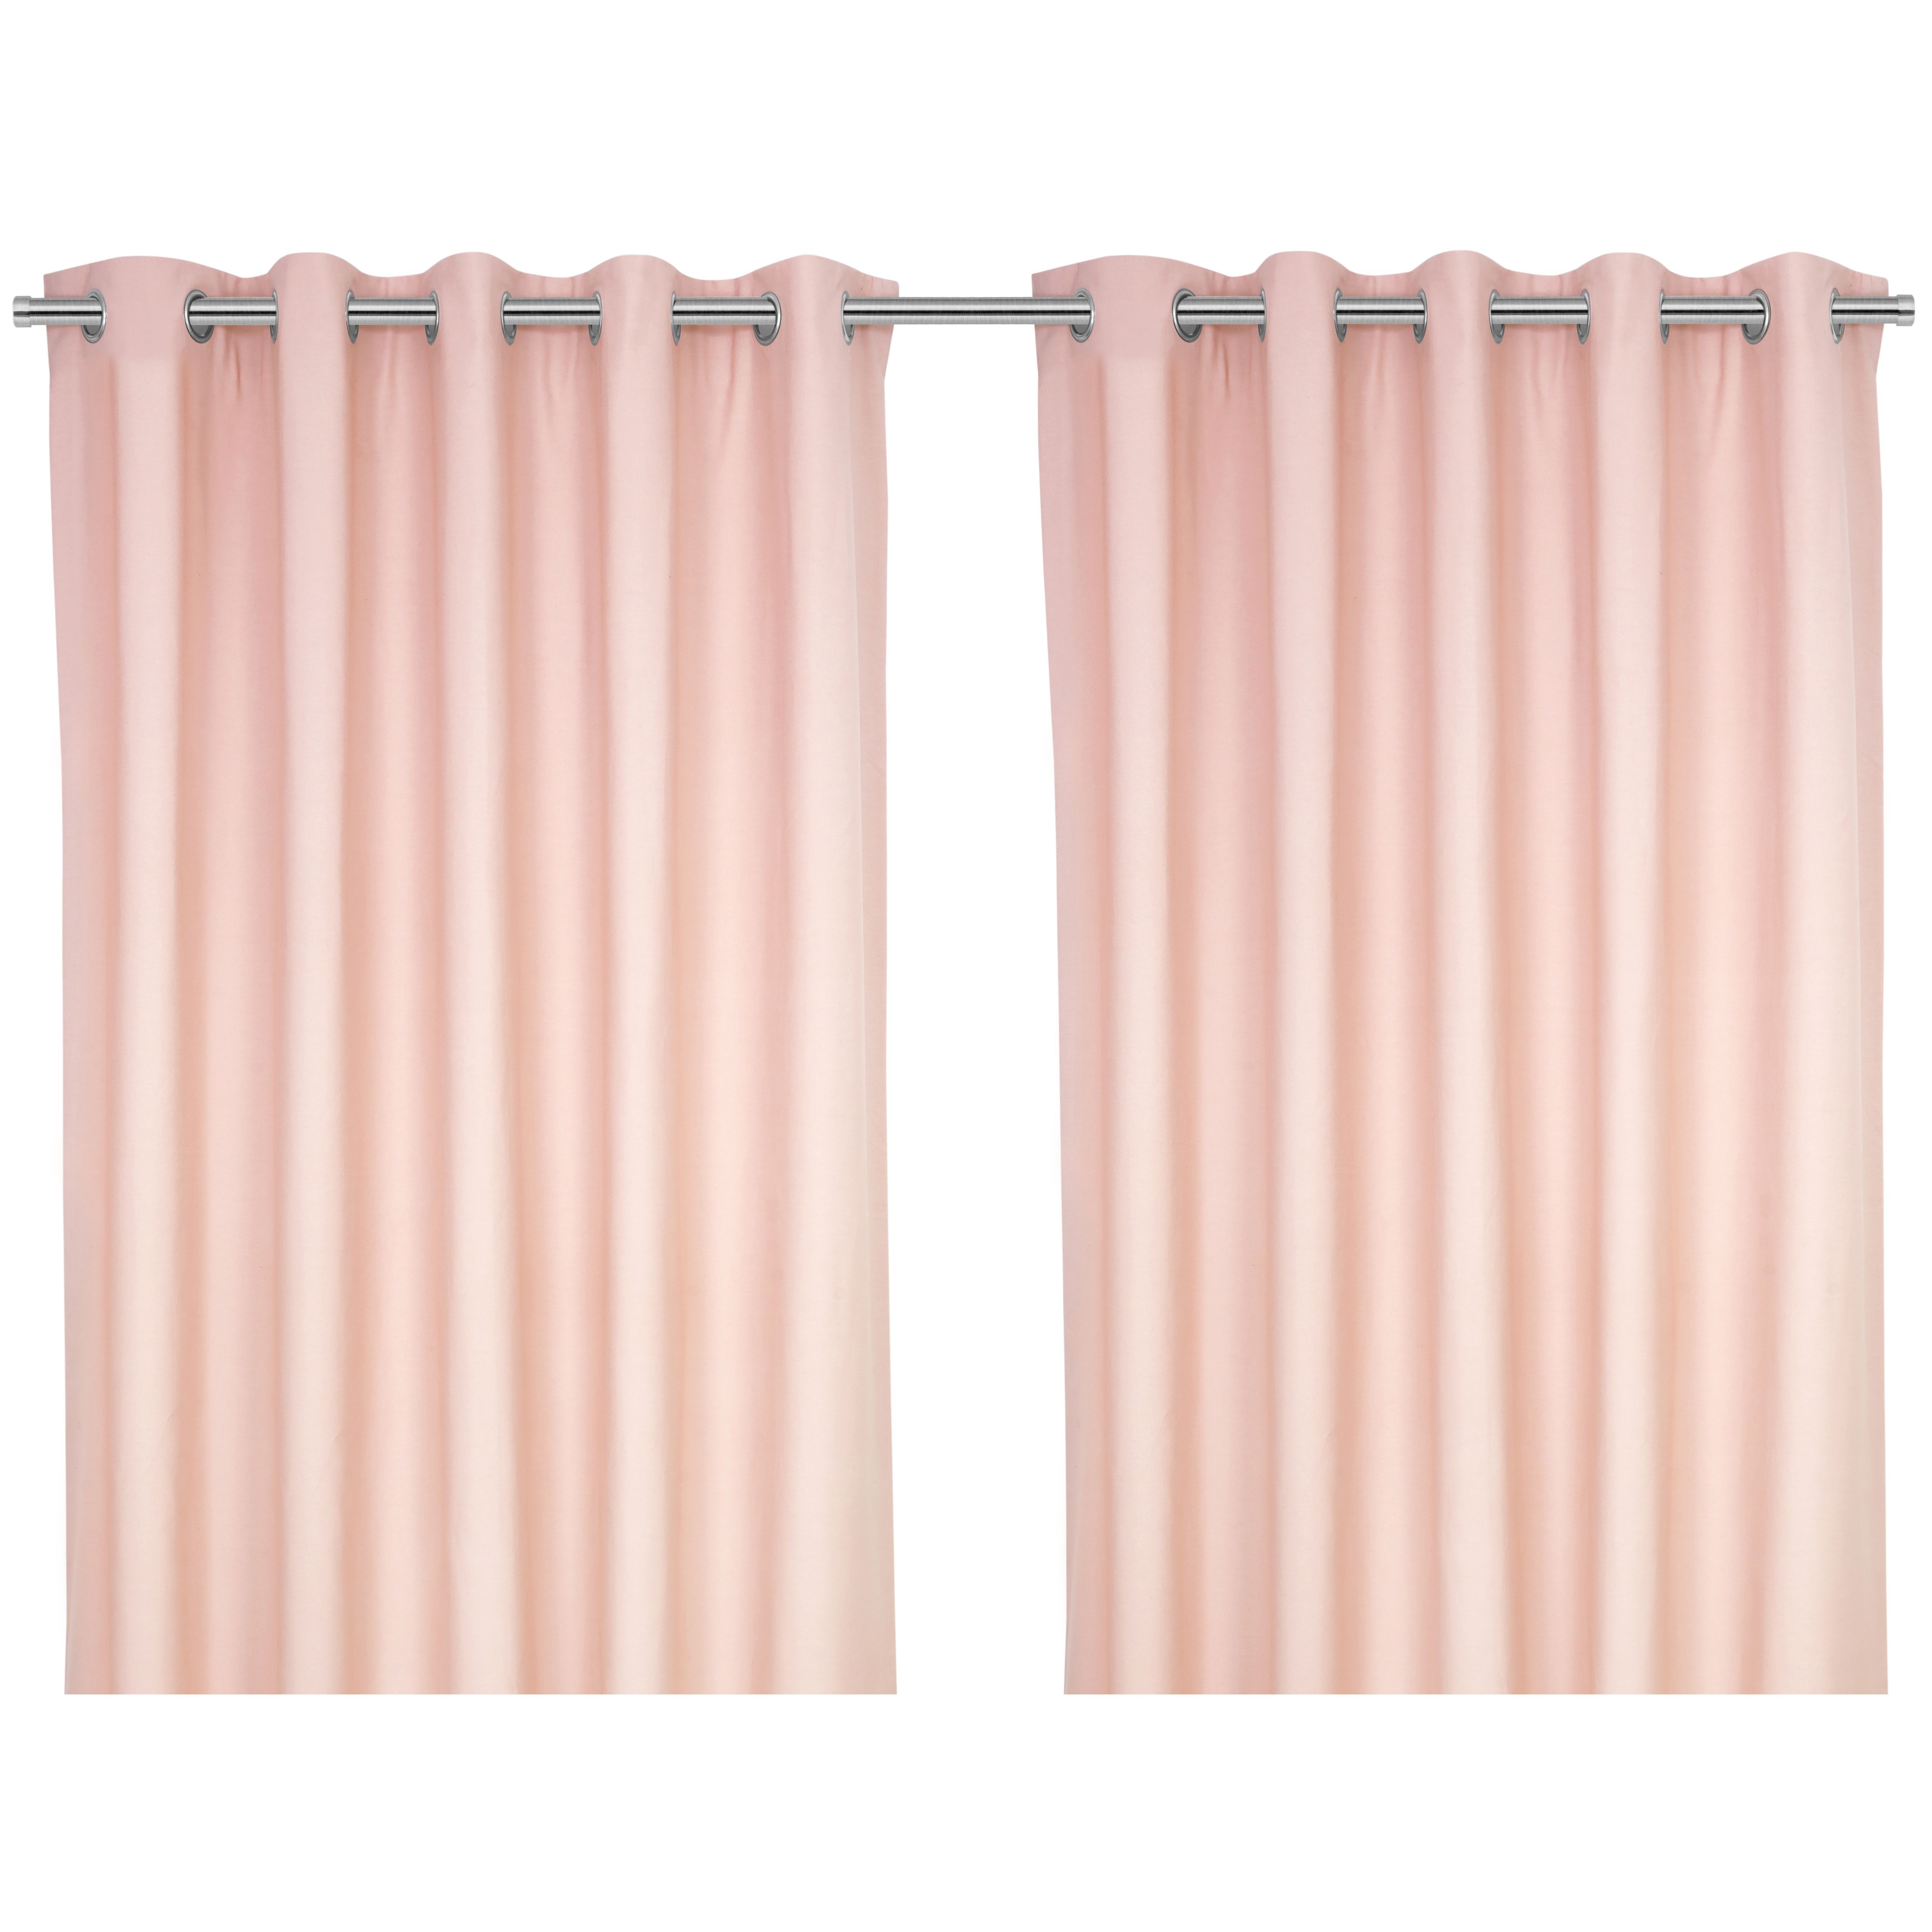 Hiva Pink Solid dyed Lined Eyelet Curtain (W)167cm (L)228cm, Pair